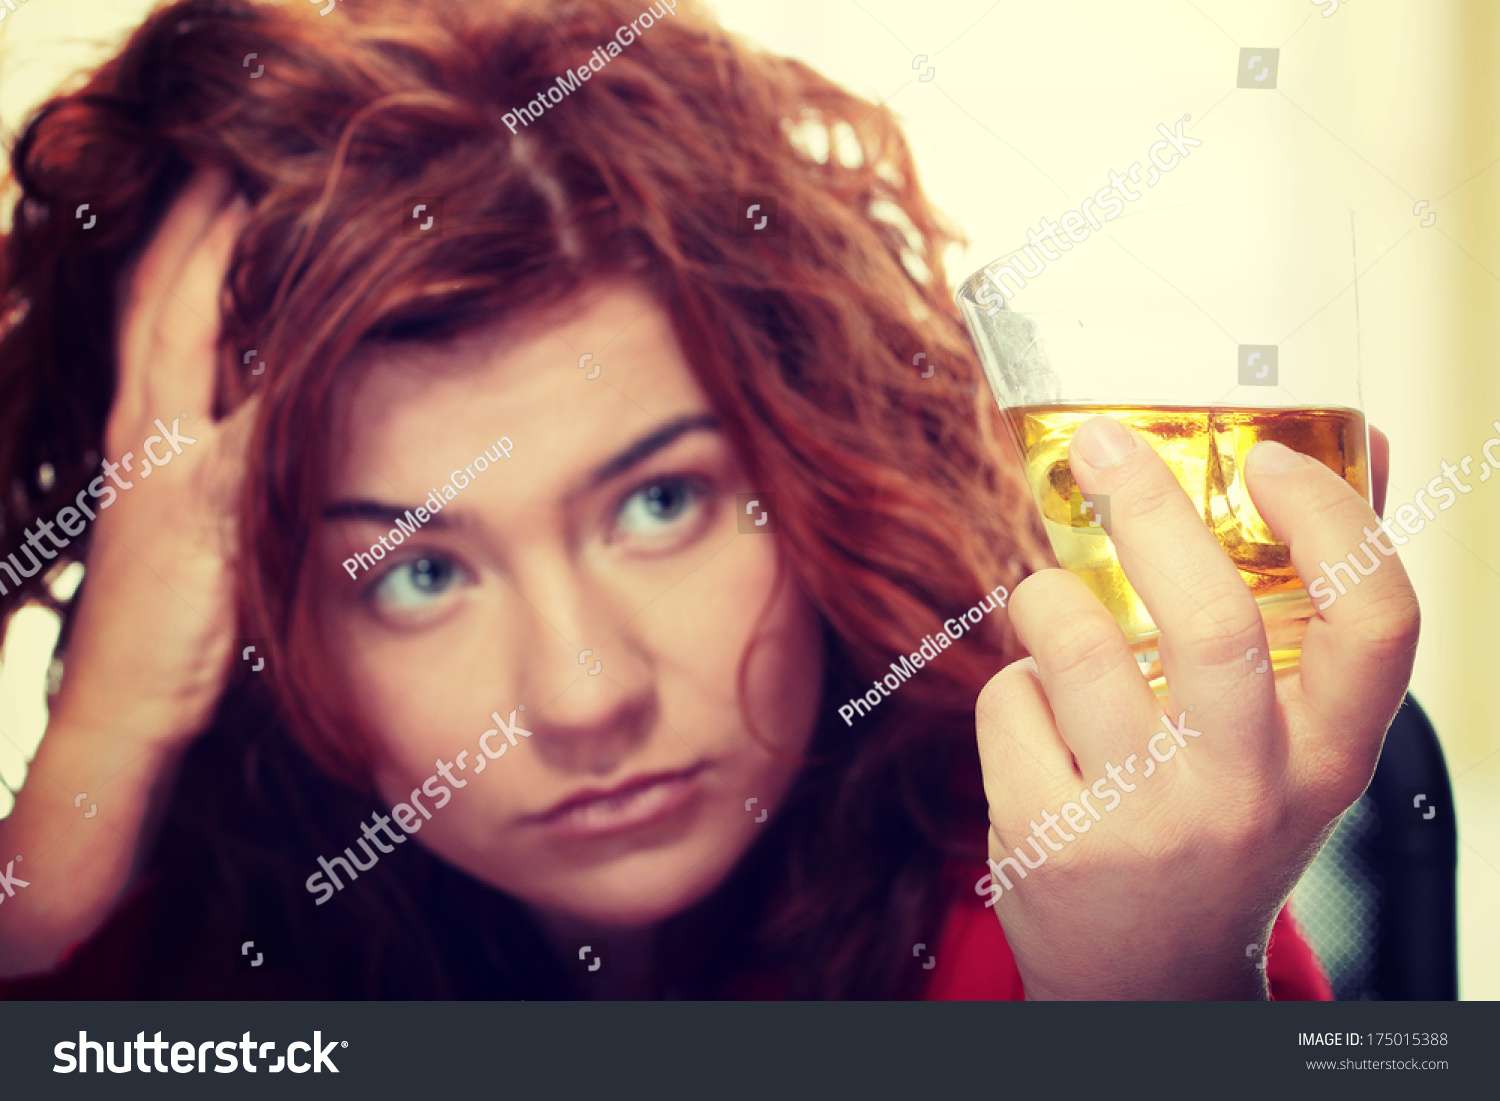 Alone Young Woman Depression Drinking Alcohol Stock Photo ...